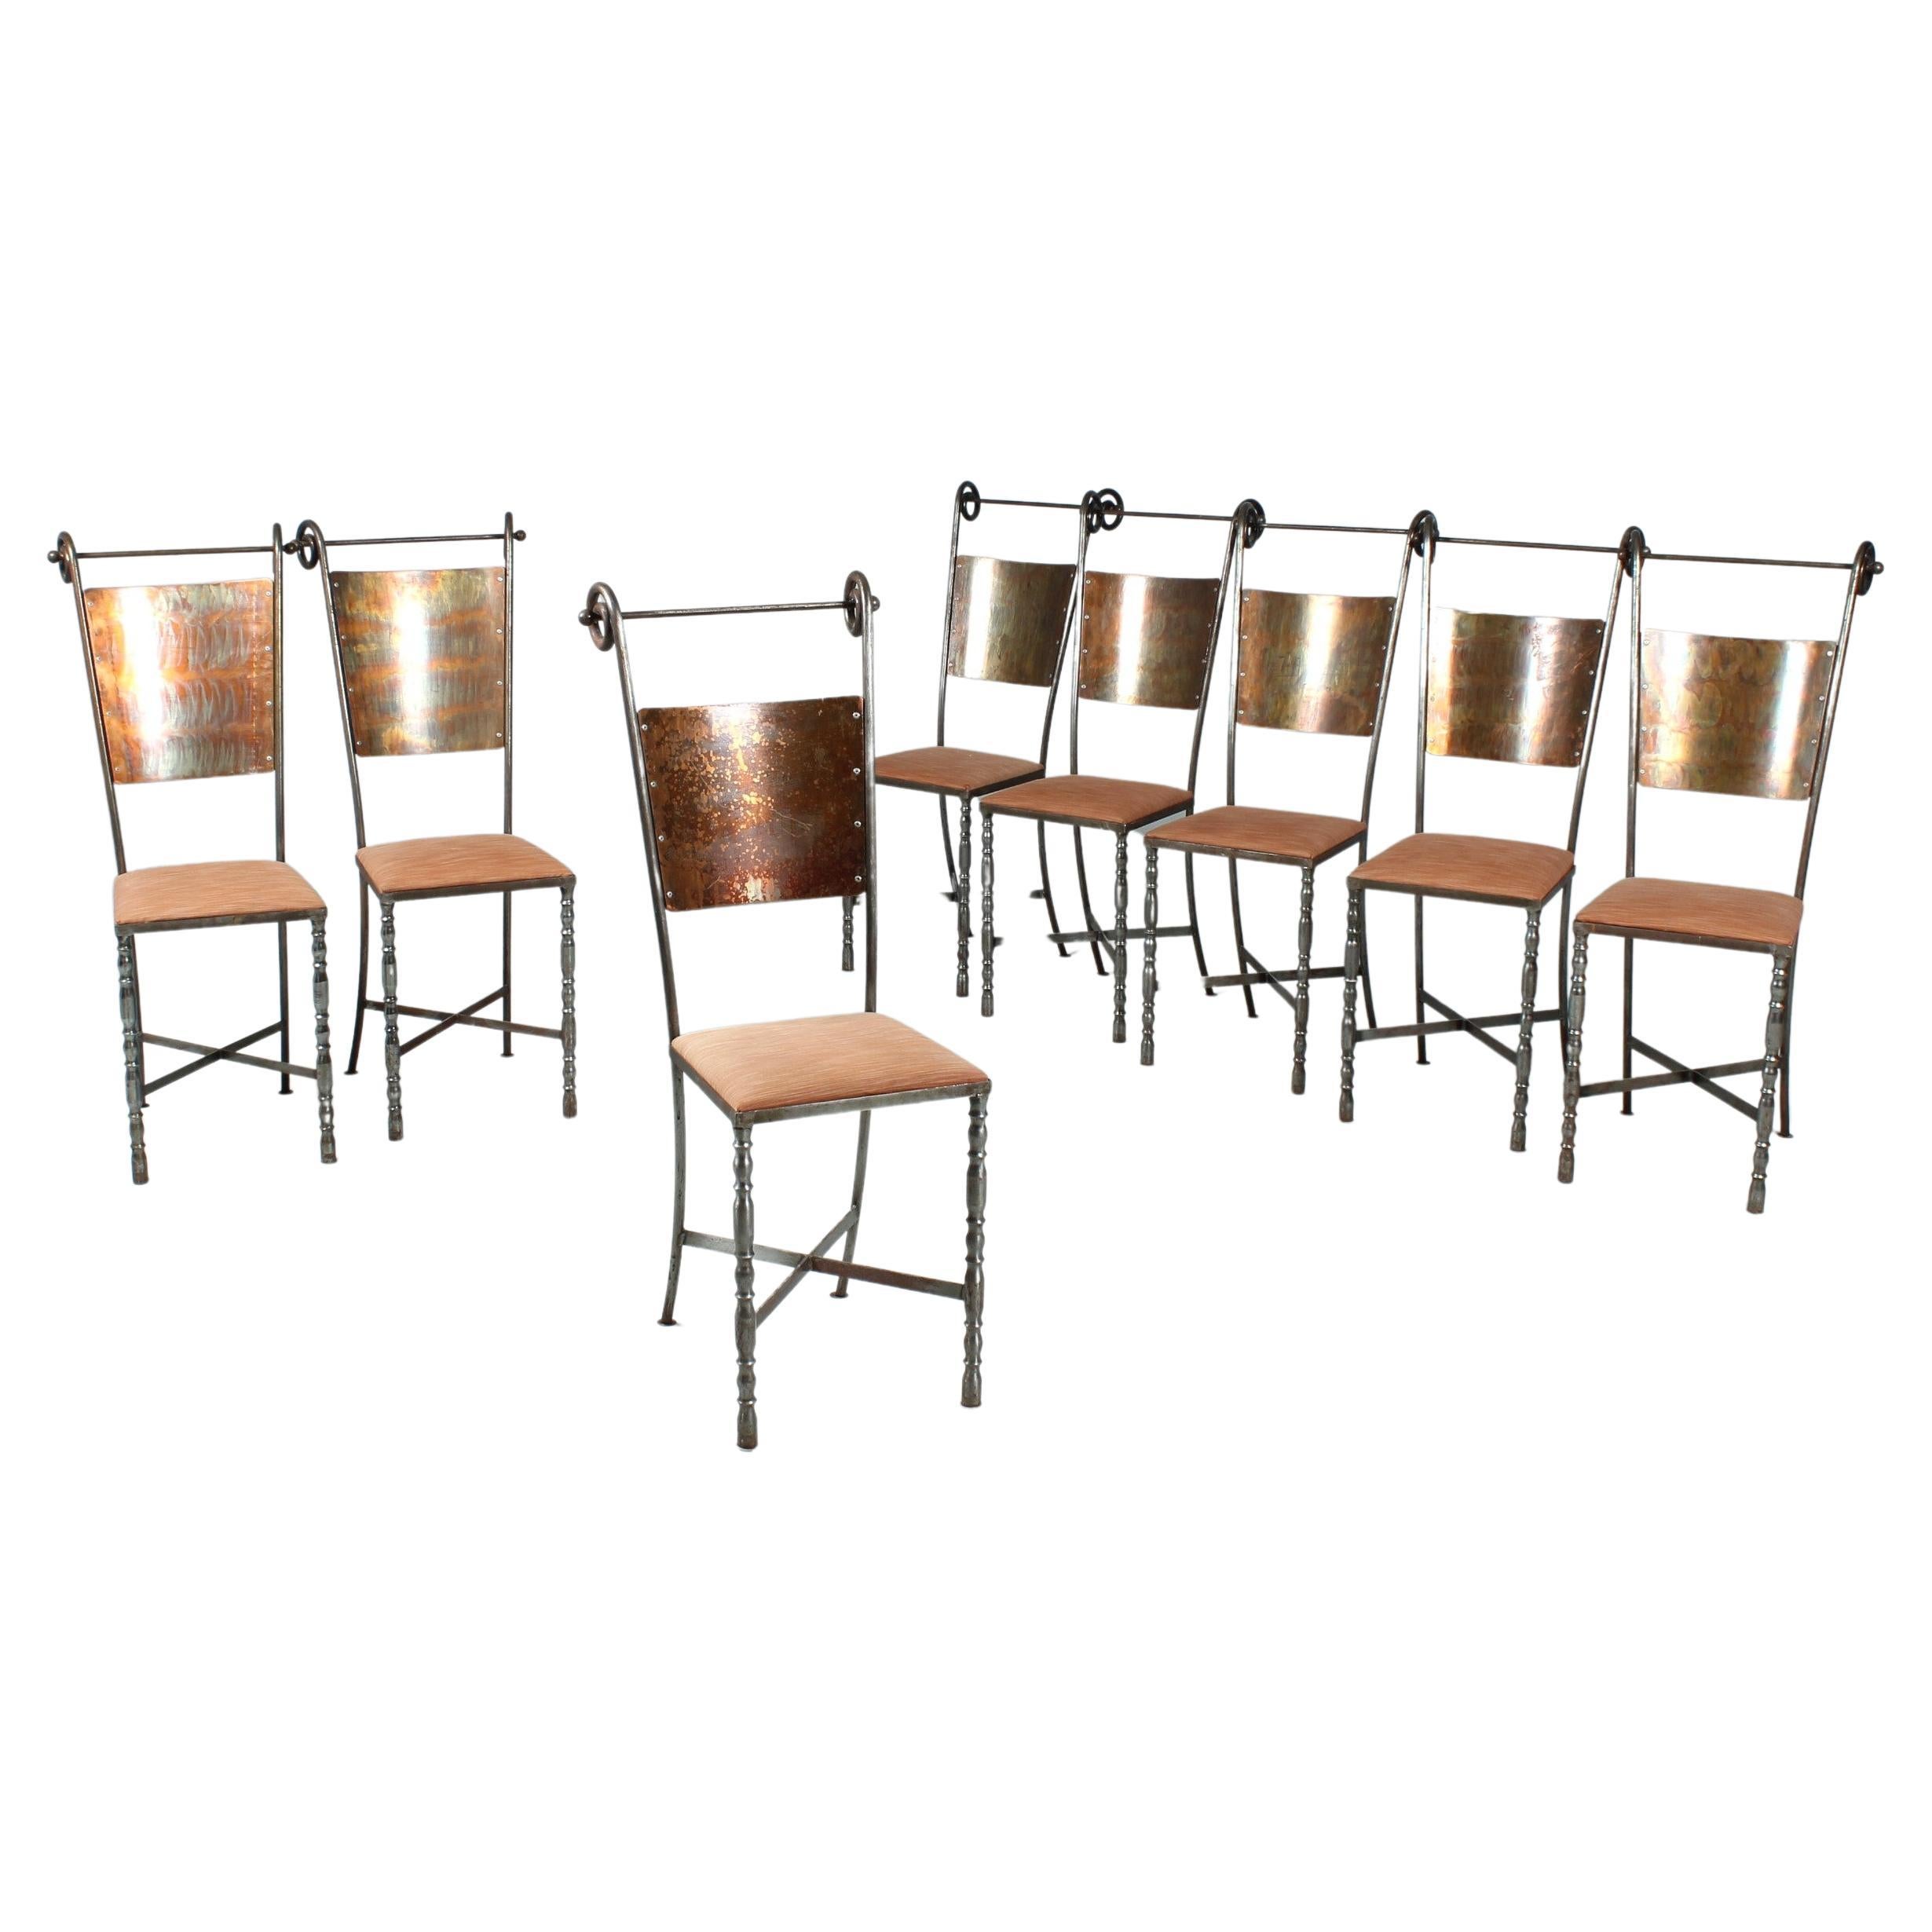 Set of 8 Wrought Iron Chairs, Dining Chairs, 1980s? For Sale